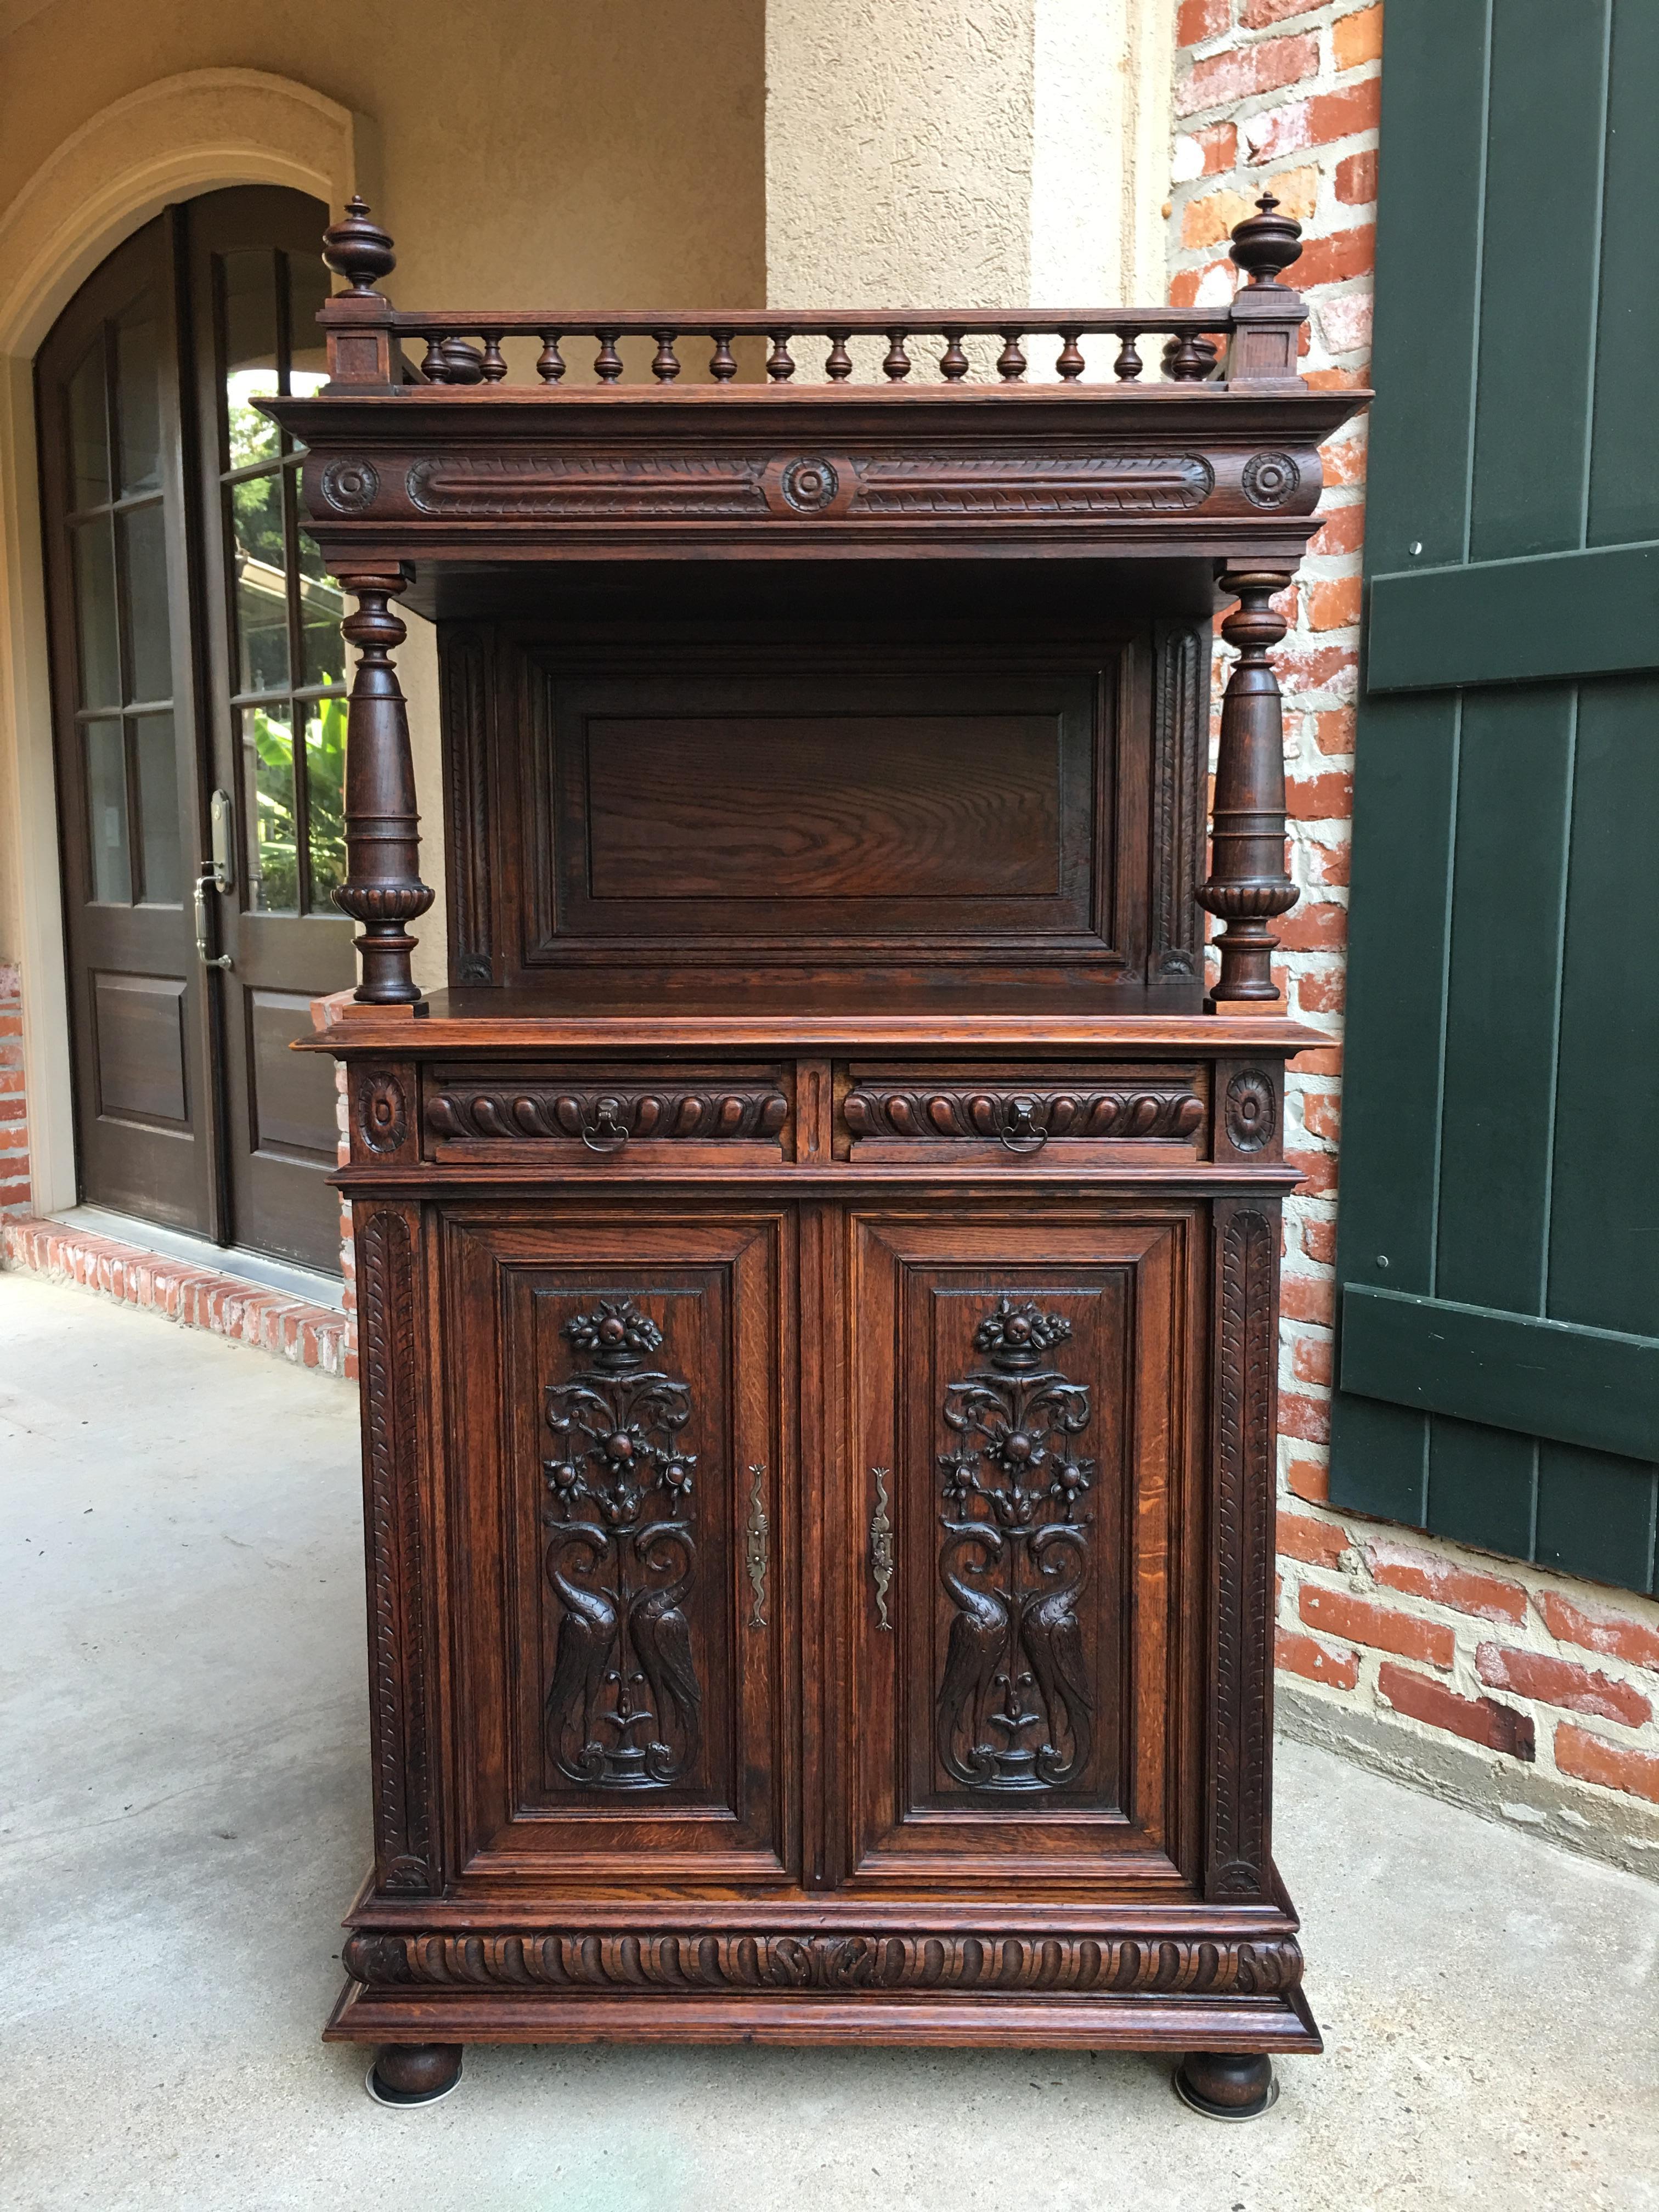 Direct from France, another unique antique carved oak French cabinet with outstanding features and a stunning silhouette~
~Carvings and trim from top to bottom, just look at the spindle top crown and those large corner finials!~
~Upper plateau has